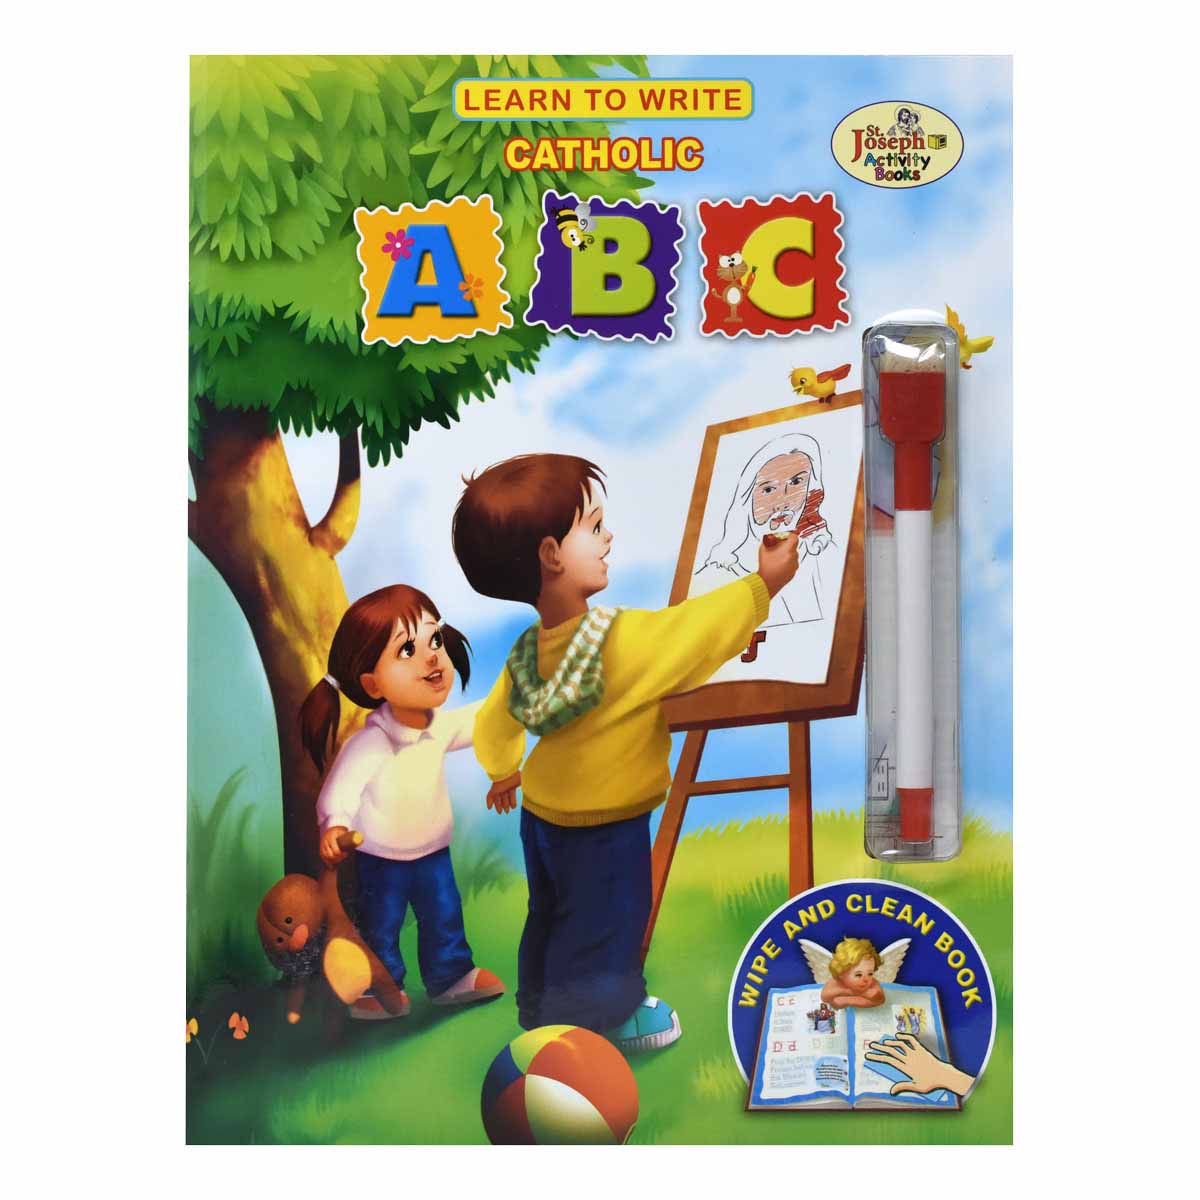 Learn To Write ABC Catholic-711, Children's Educational Book